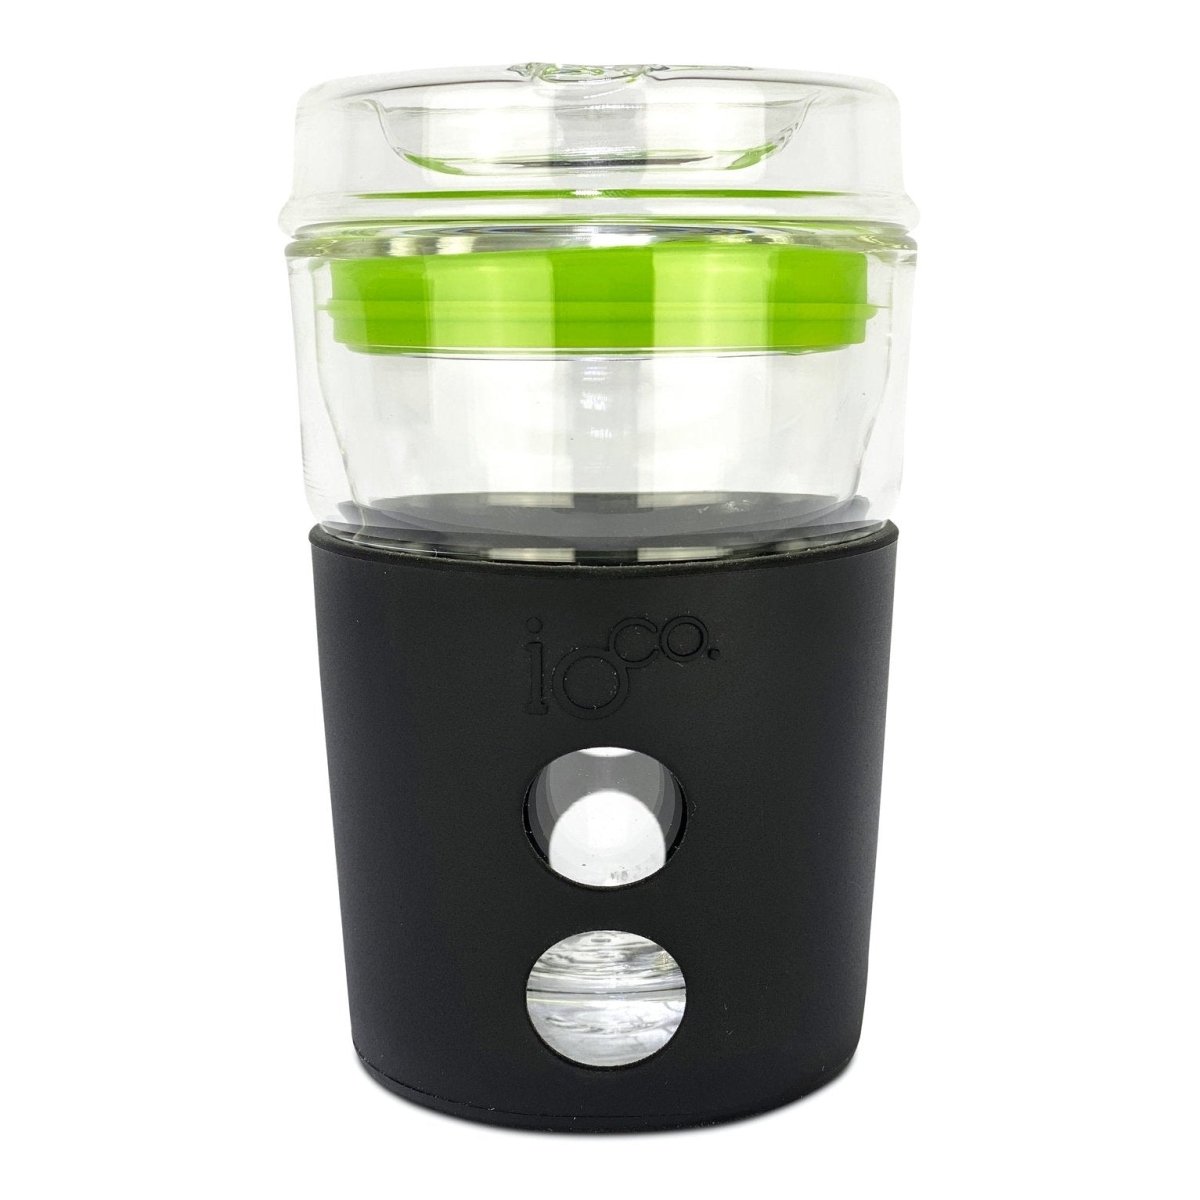 IOco 8oz Reusable Glass Coffee Cup - Black Night with Apple Green Seal.